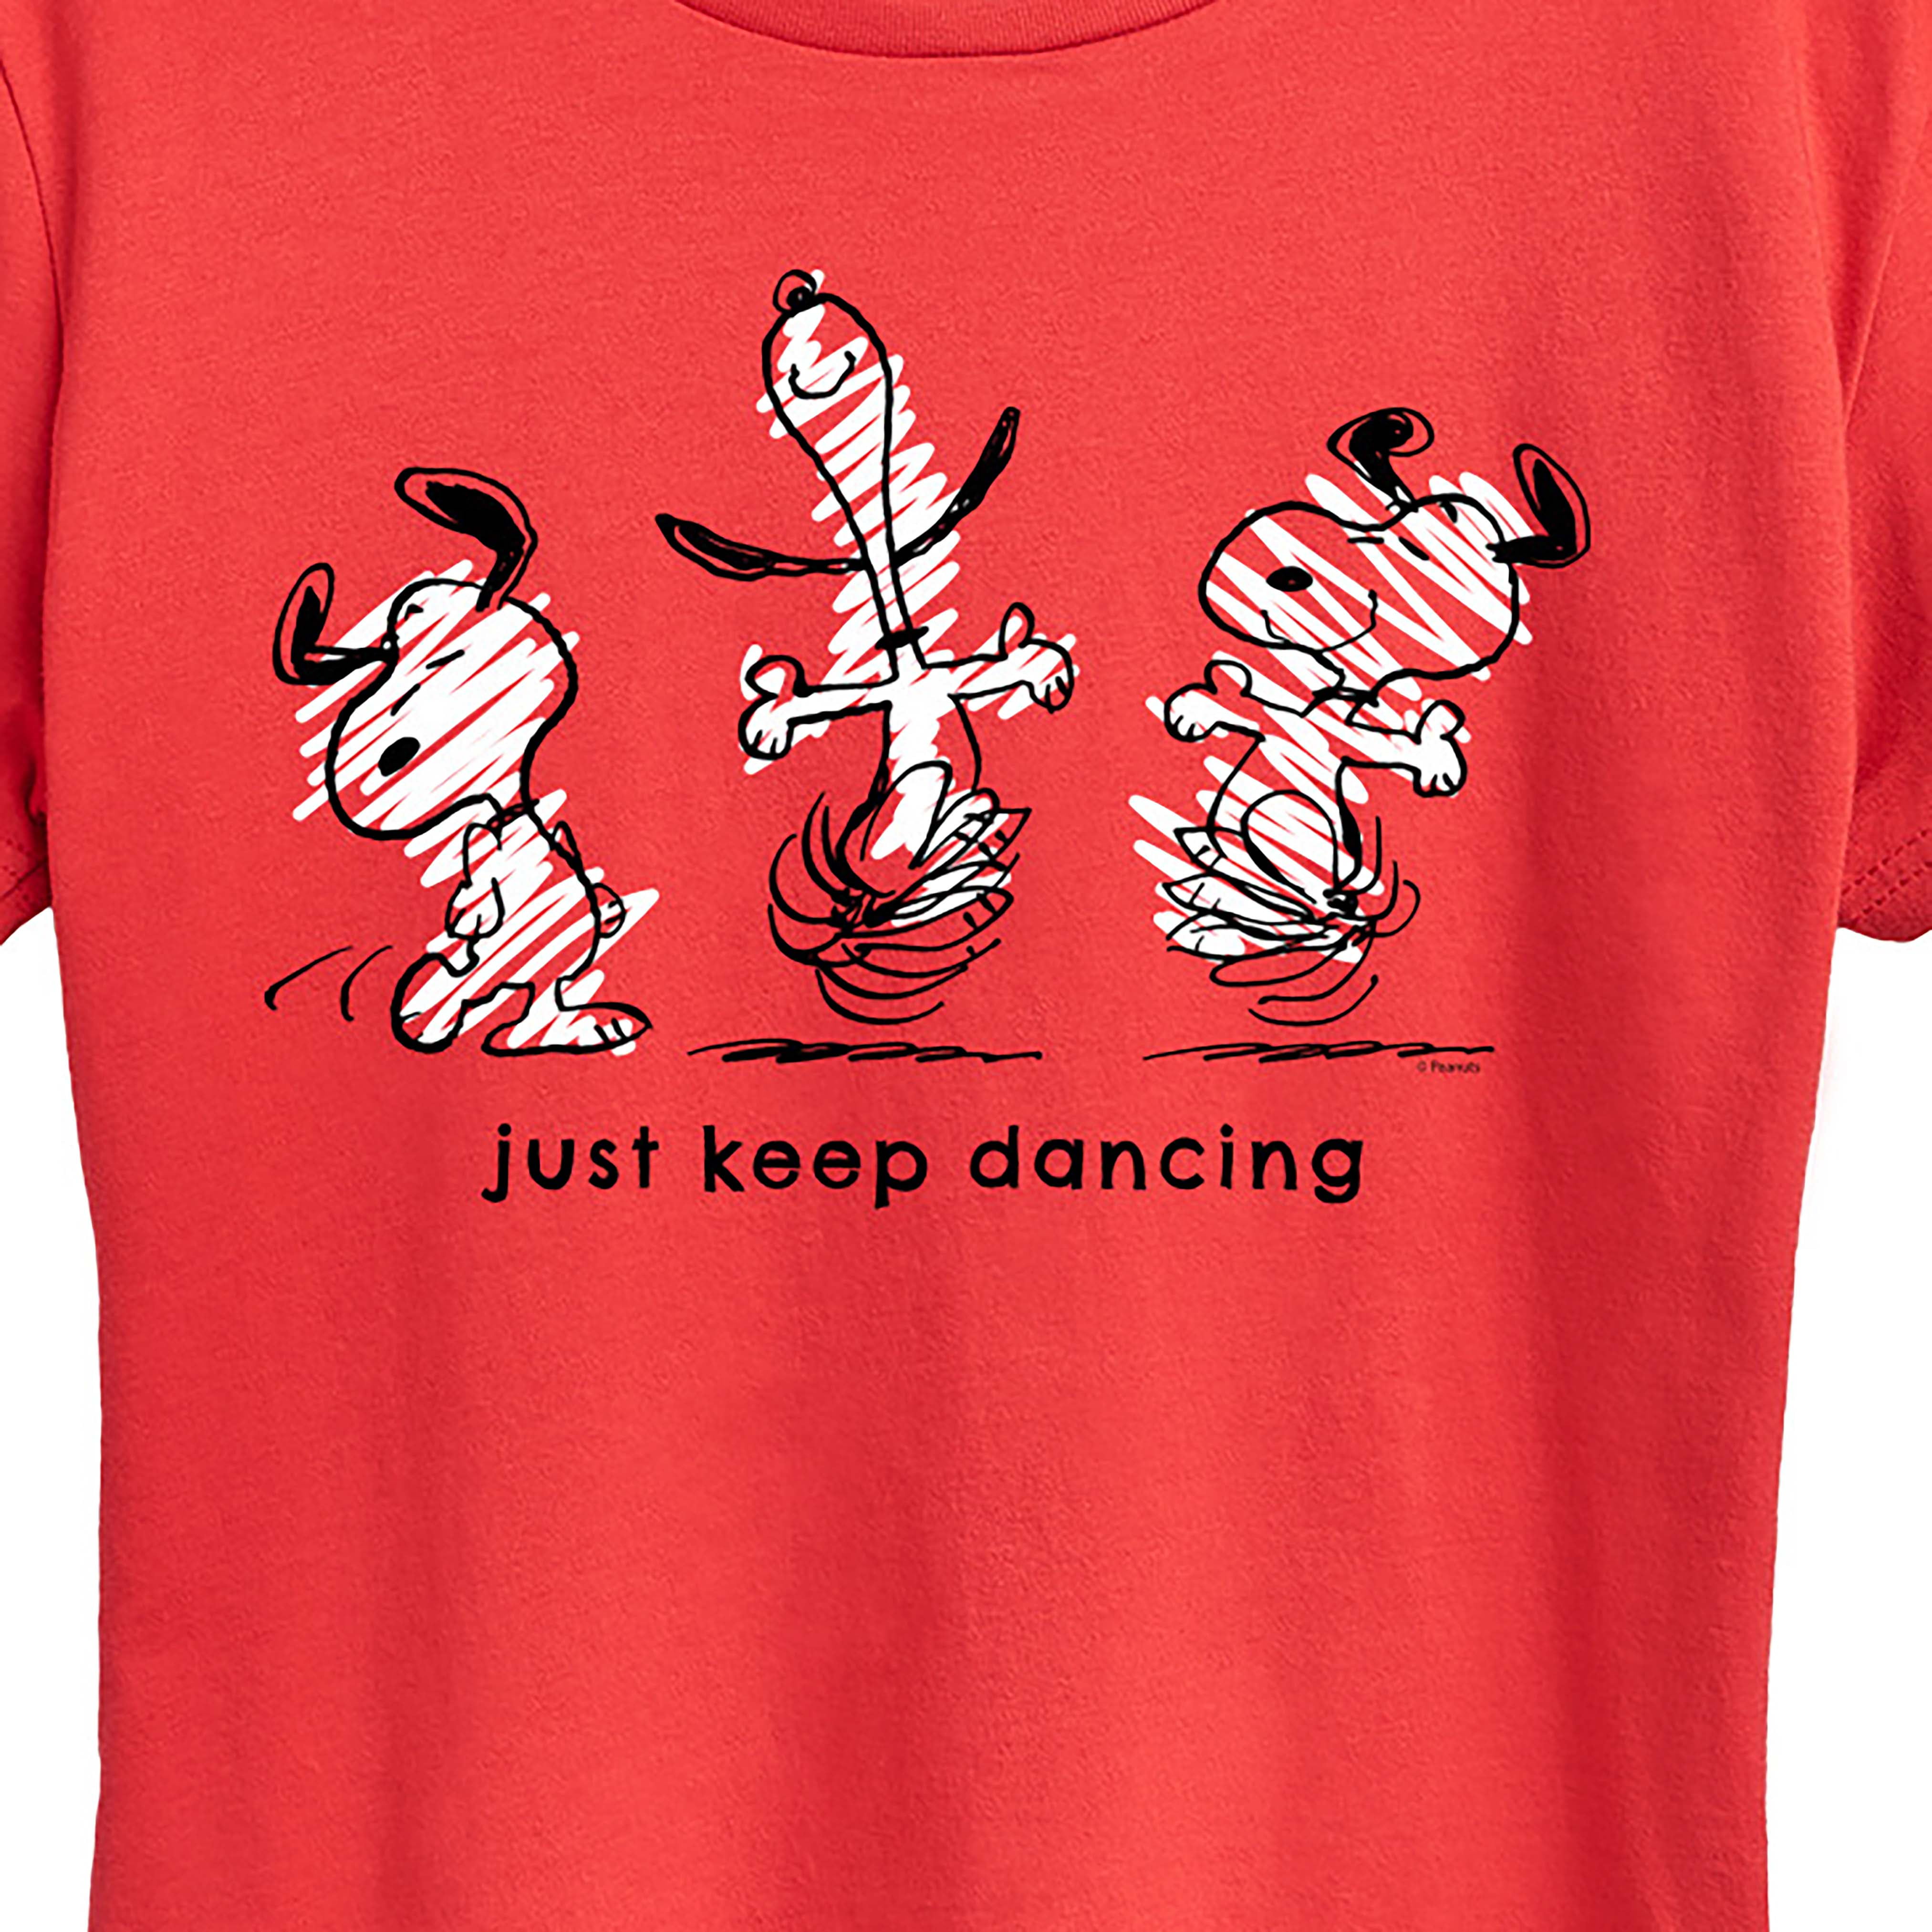 Peanuts - Snoopy Just Keep Dancing - Women\'s Short Sleeve Graphic T-Shirt